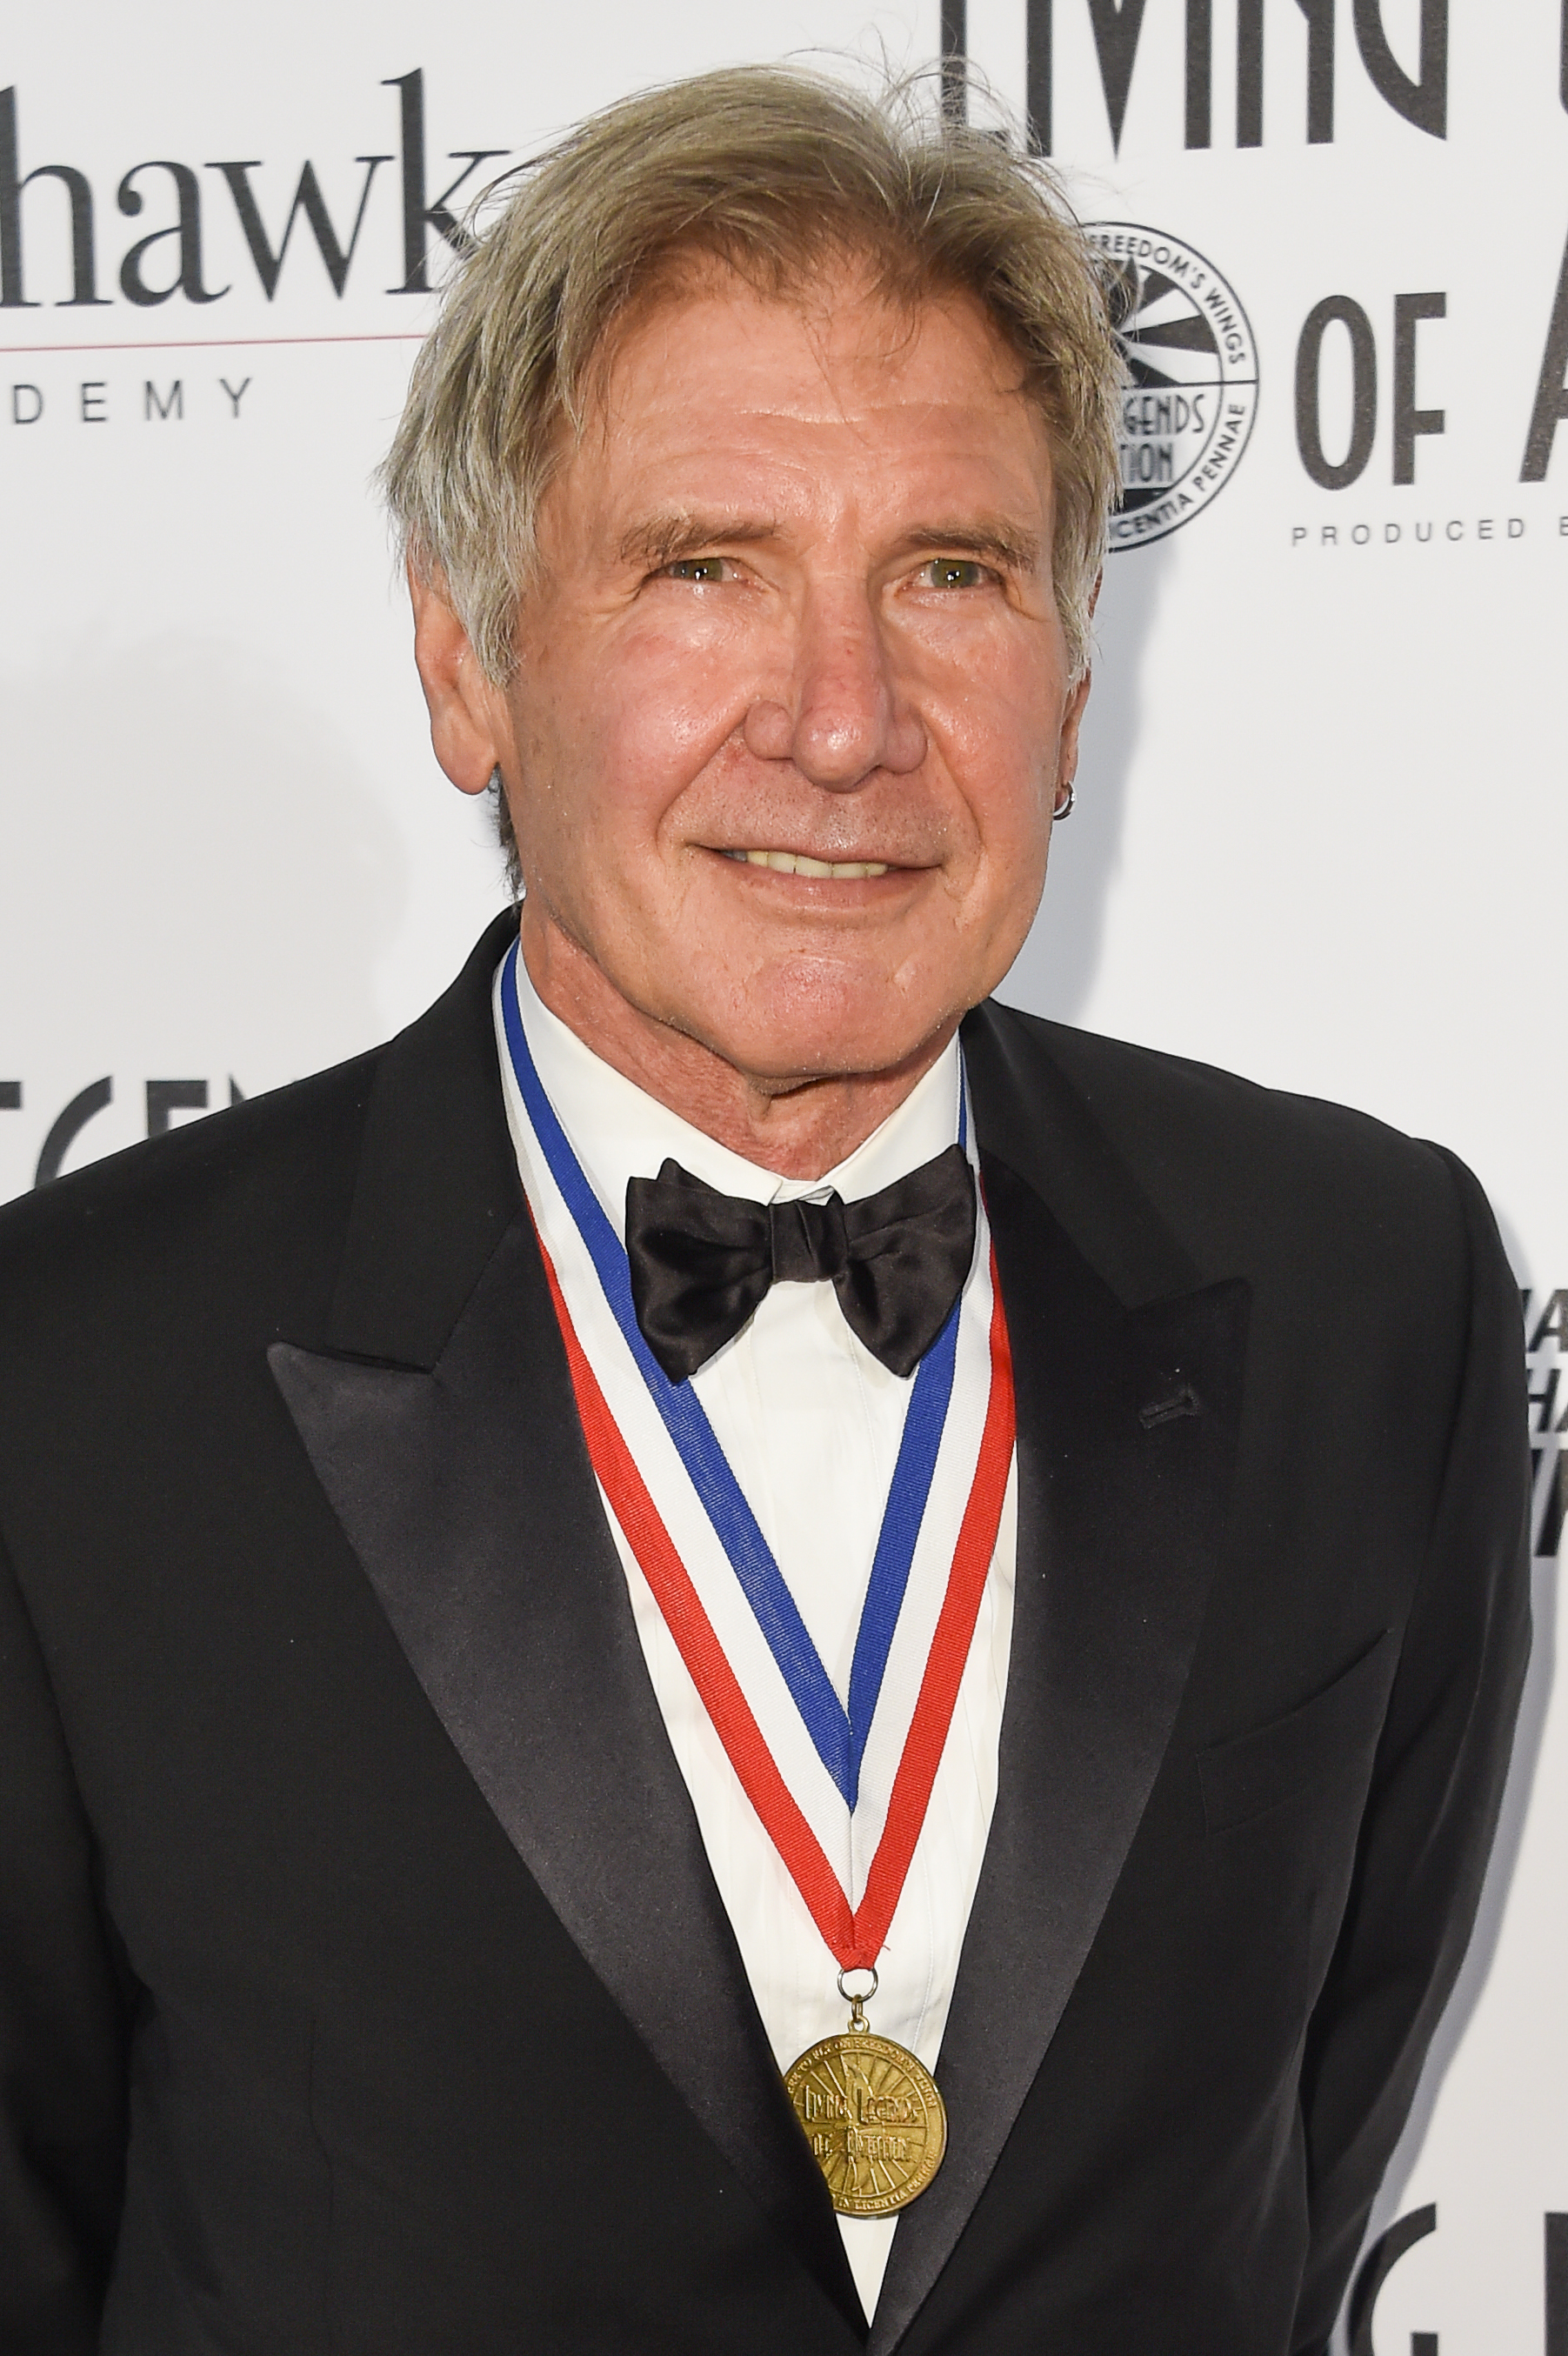 Harrison Ford attends the 12th Annual Living Legends of Aviation Awards in Los Angeles on Jan. 16, 2015.